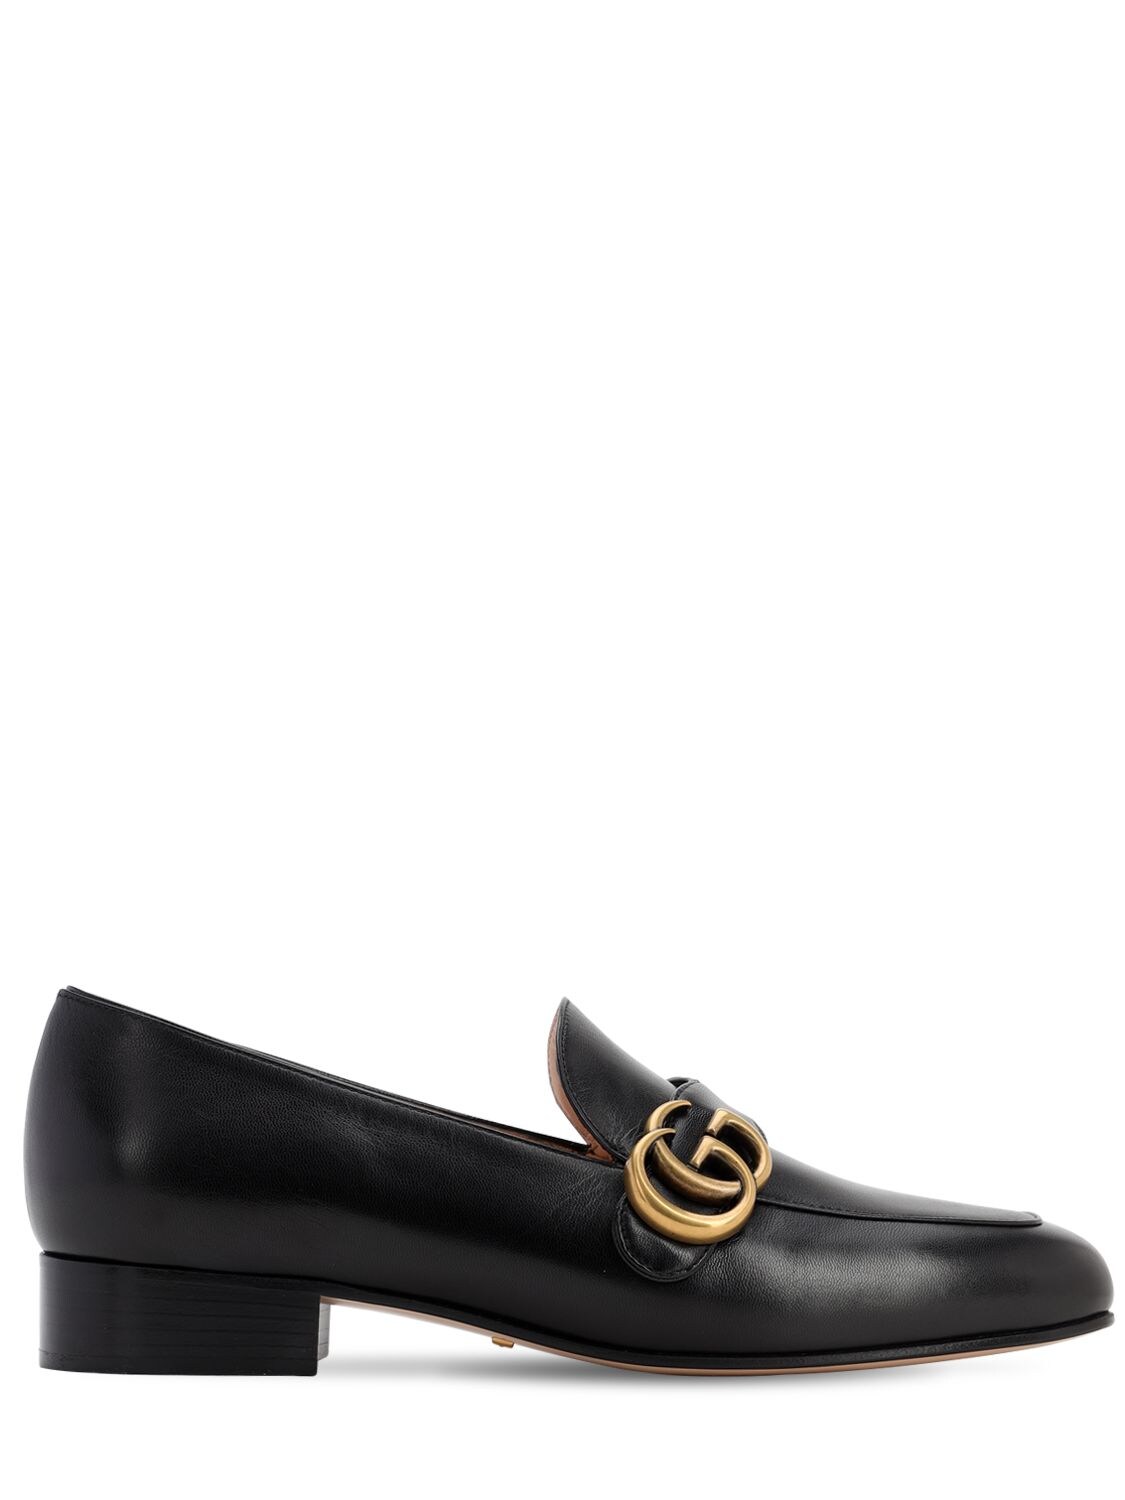 Gucci 25mm Marmont Leather Loafers In Black